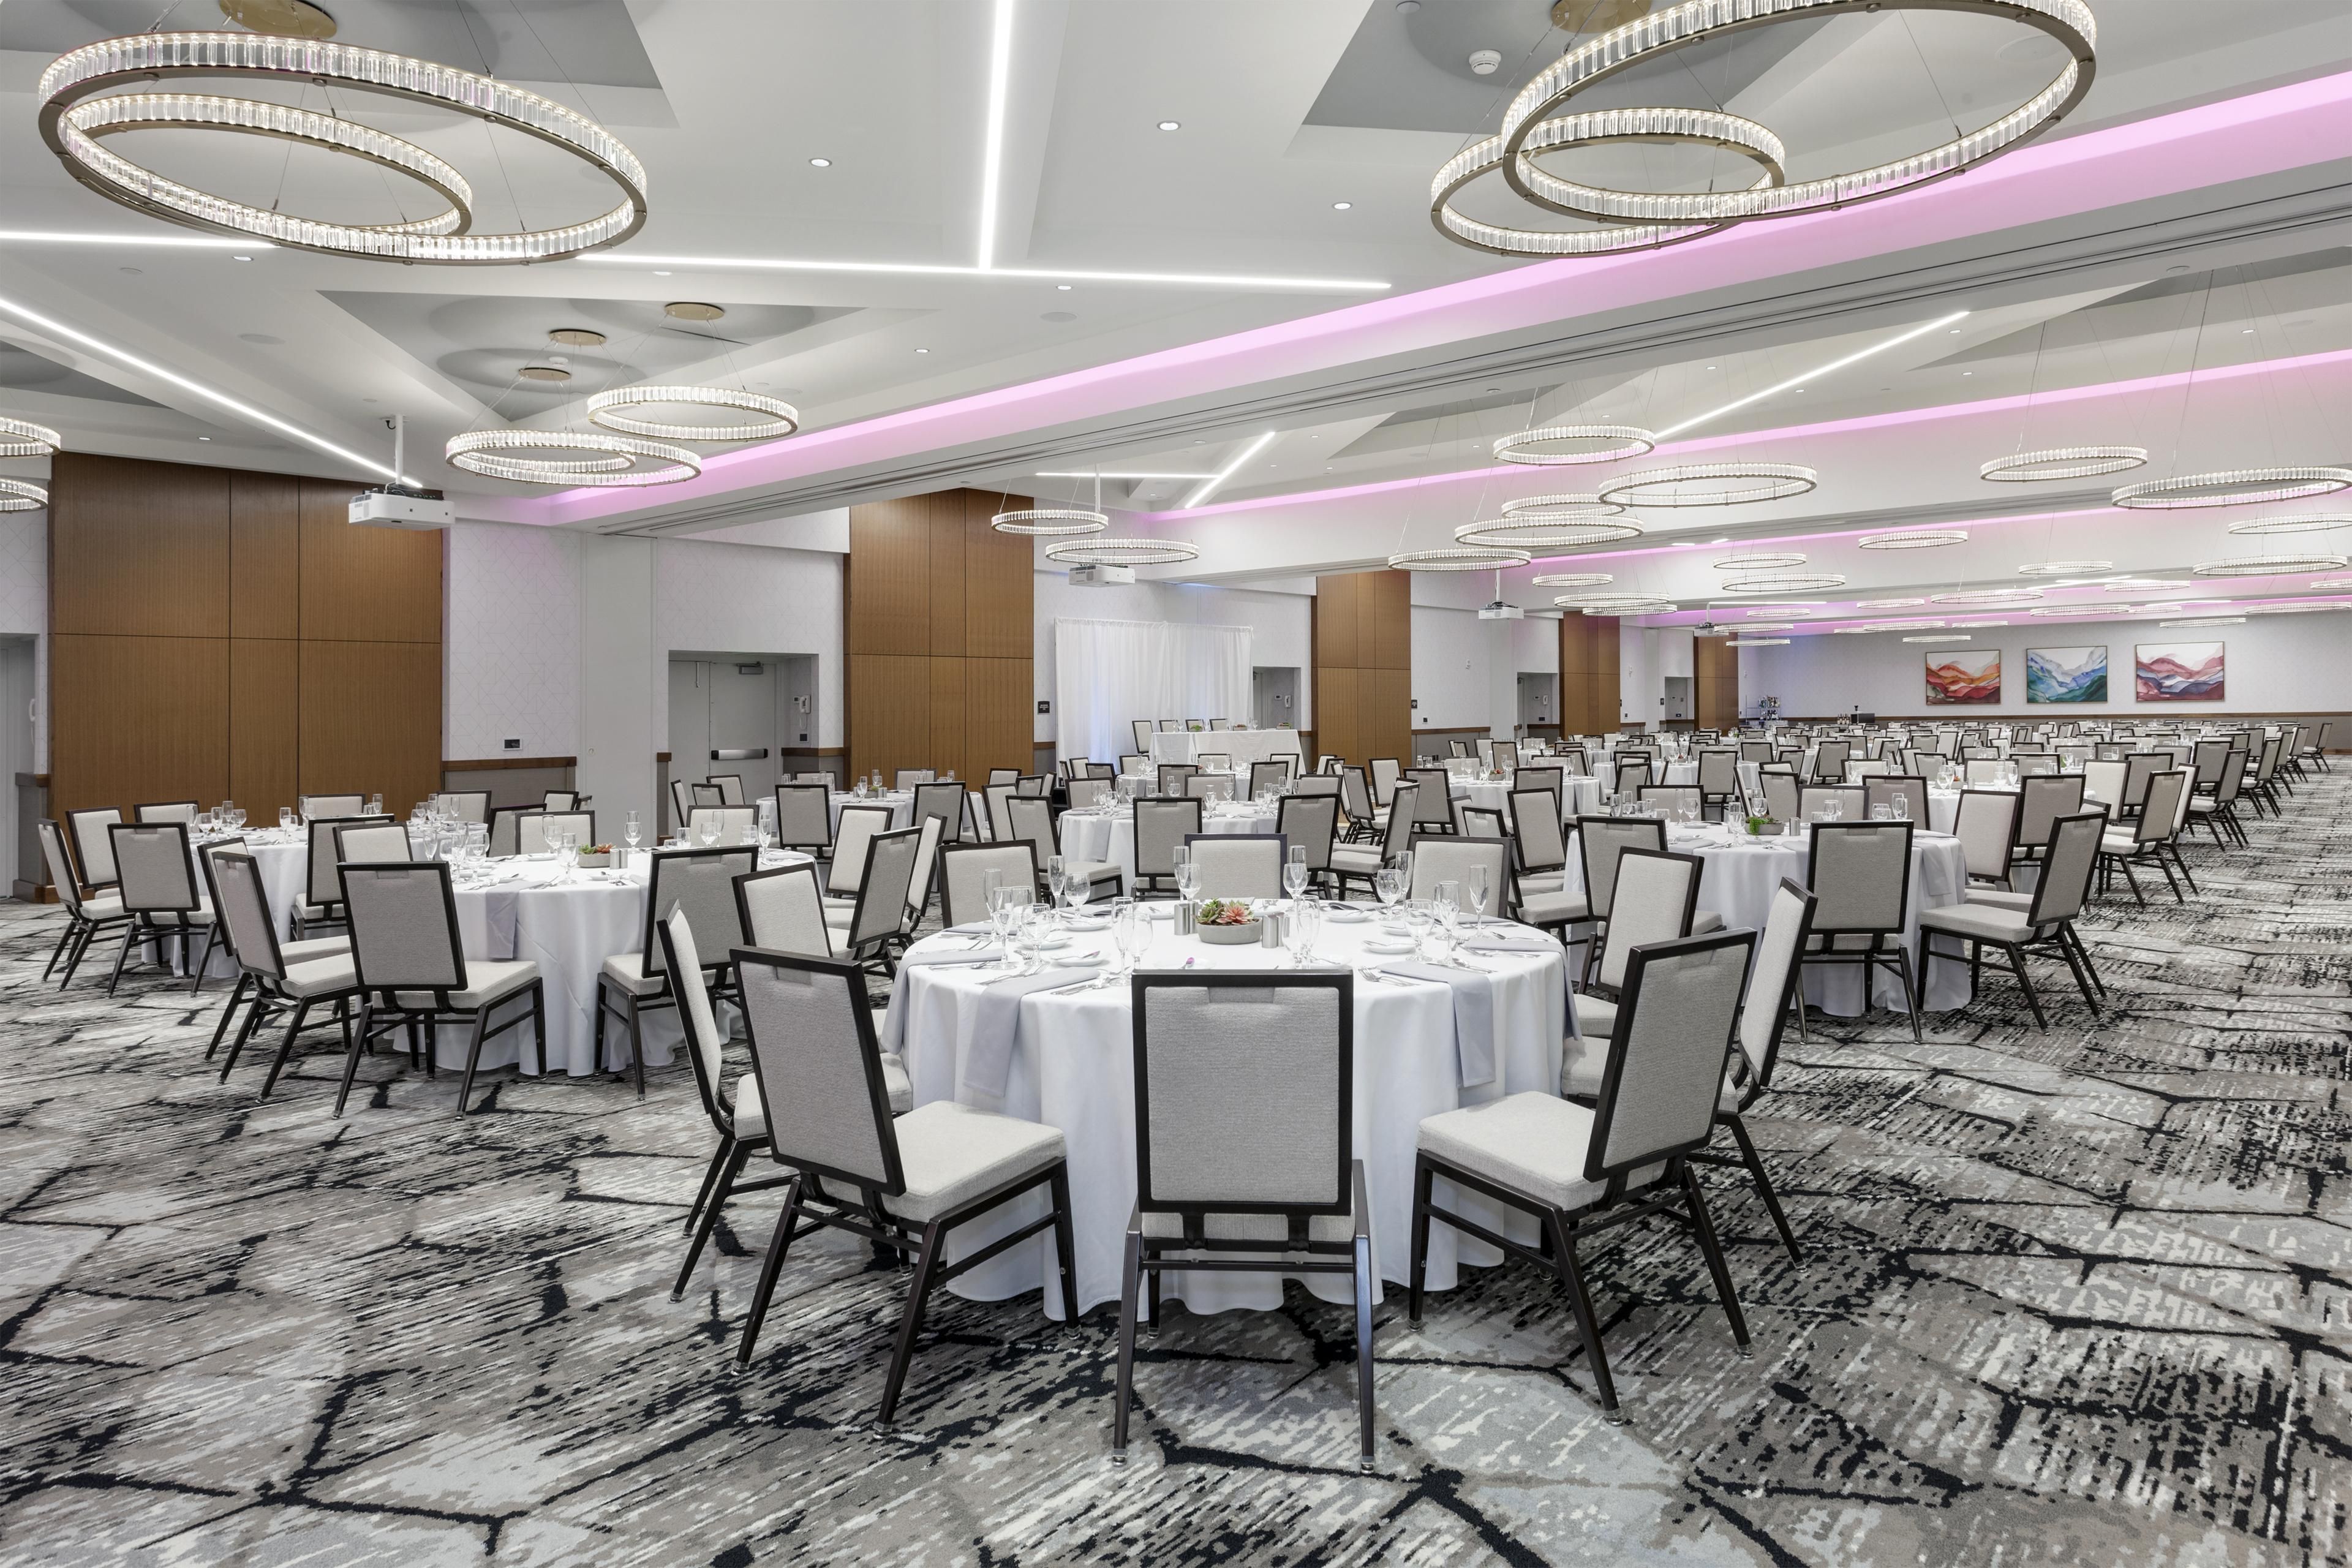 Royale Ballroom at Crowne Plaza Lansing West designed to accommodate around 1000 guests